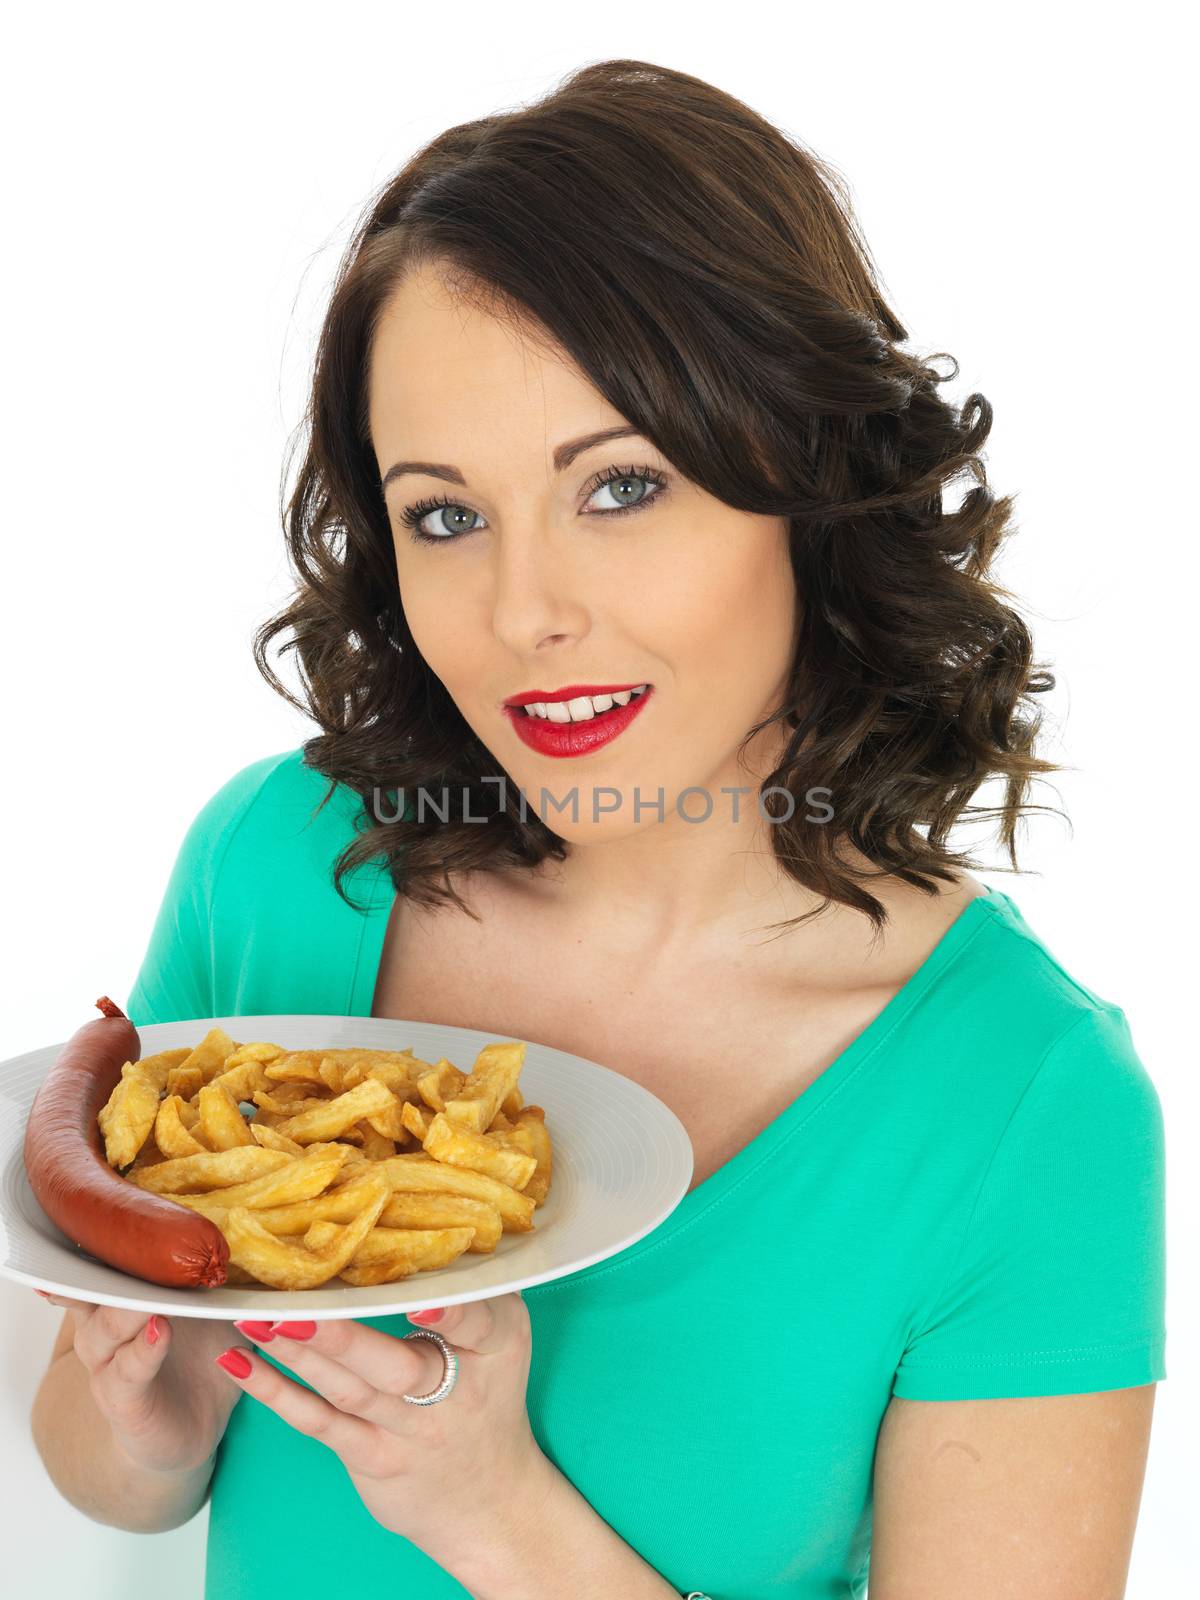 Young Woman Eating Saveloy Sausage and Chips by Whiteboxmedia